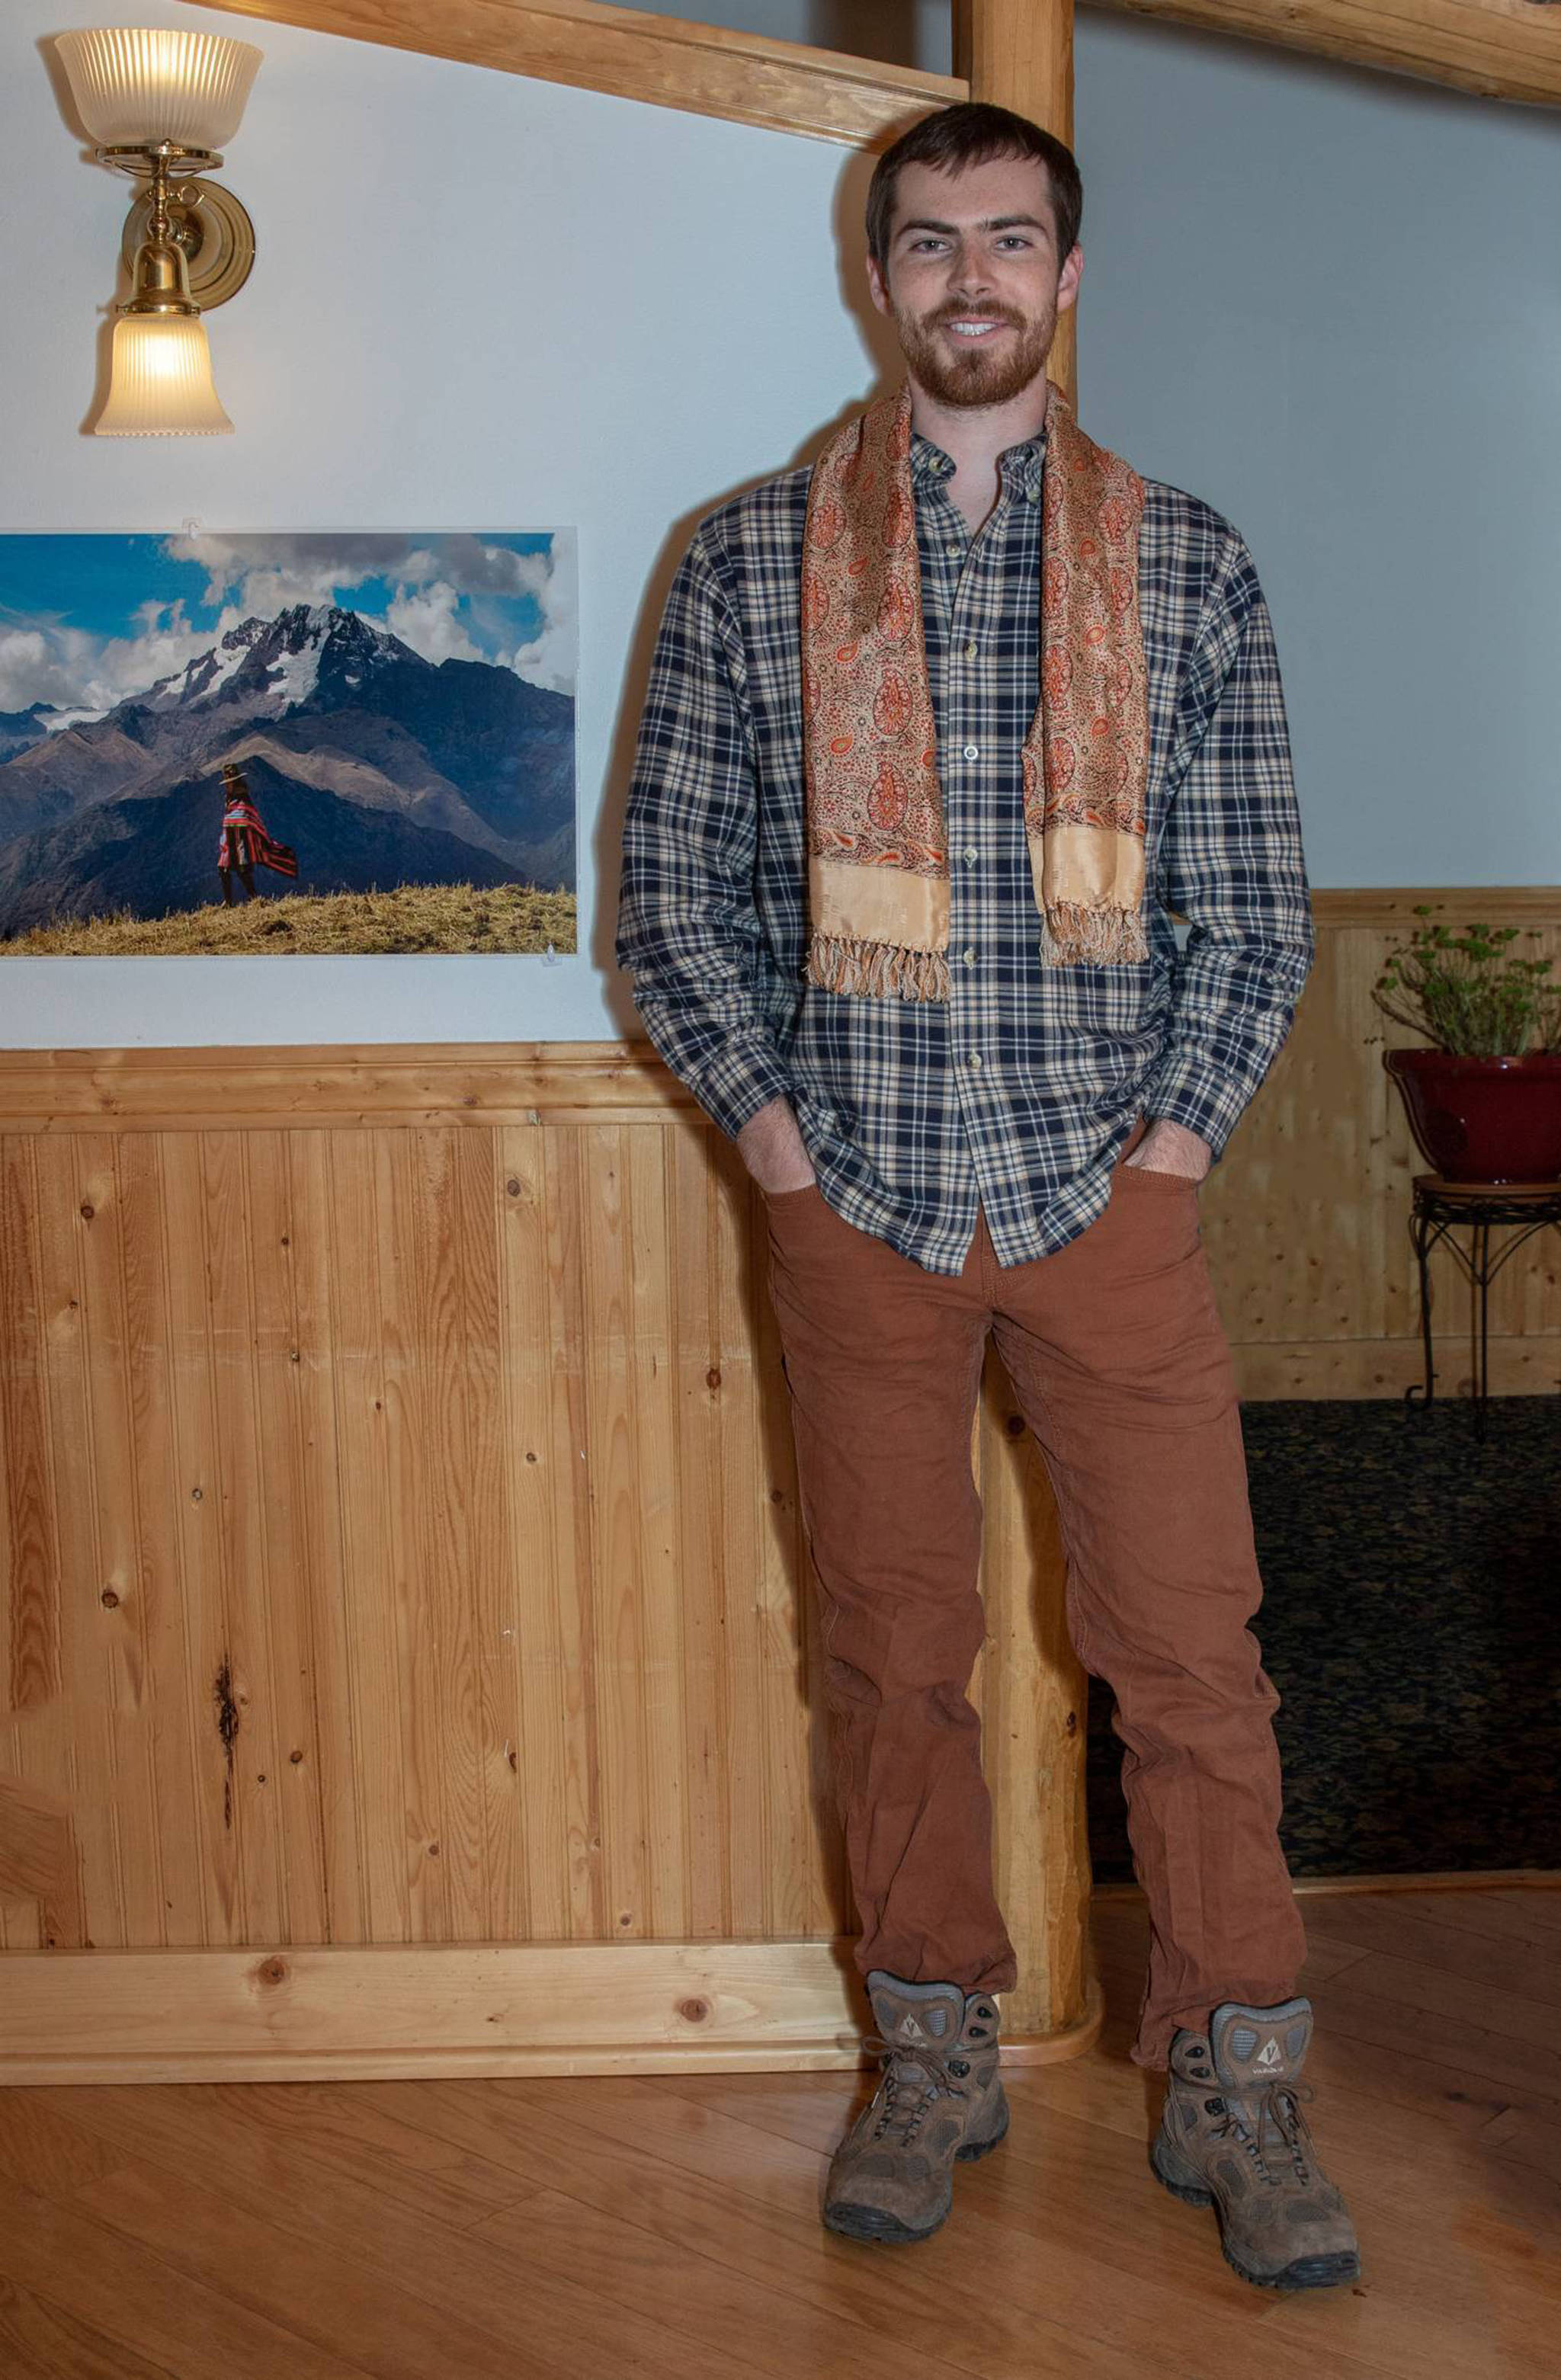 Dec. 30, 2018: Out on the town for dinner and a movie, Brad Chauvin caught my eye at “The Four Plates” Peruvian restaurant. His flannel shirt from L.L. Bean, burnt sienna pants from Prana and Vasque hiking boots were casual and coordinated. A vintage paisley silk scarf added just the right amount of color and style to his relaxed look.